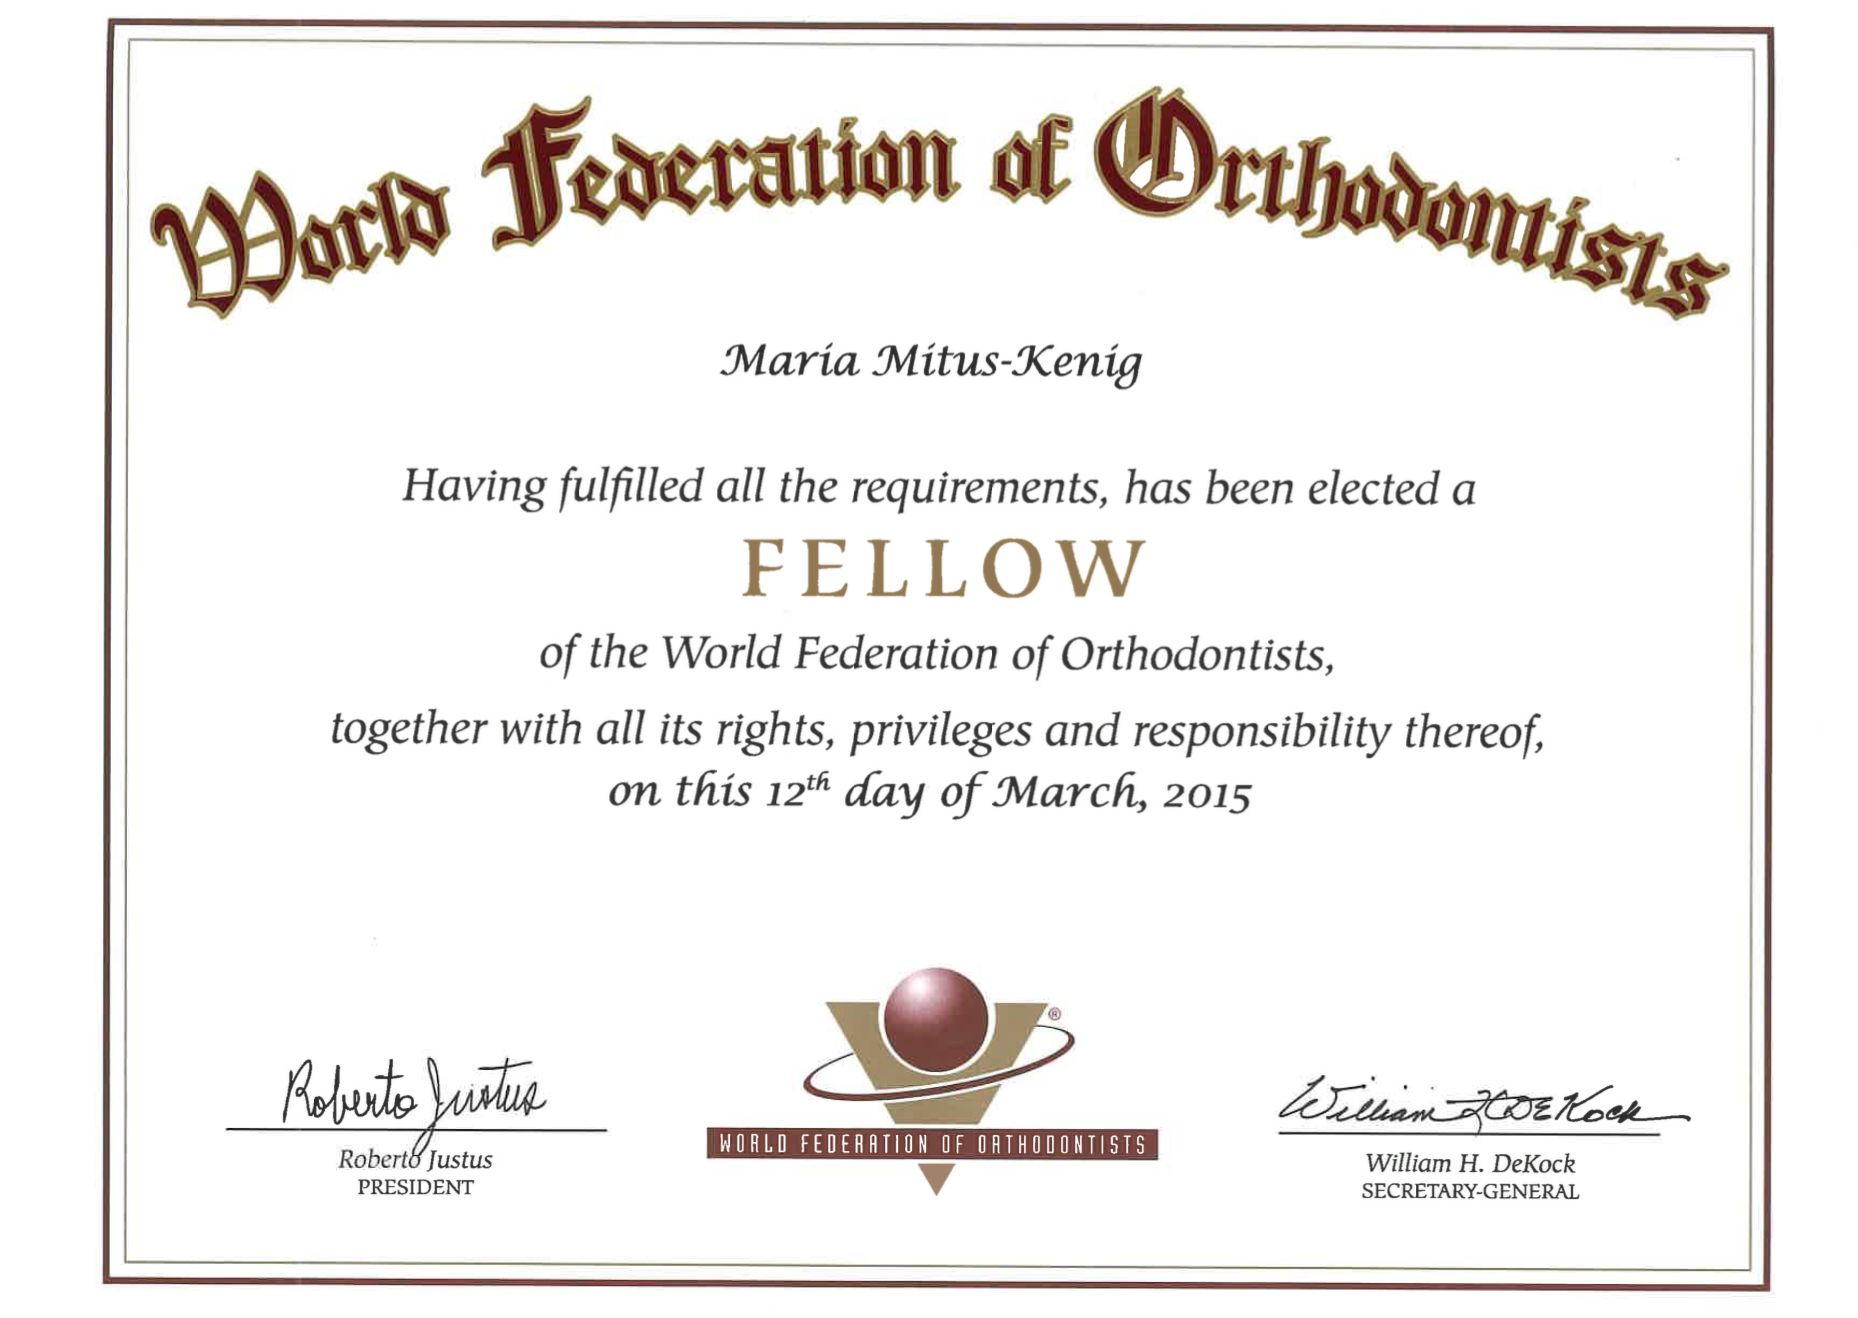 Certificate of the World Federation of Orthodontists